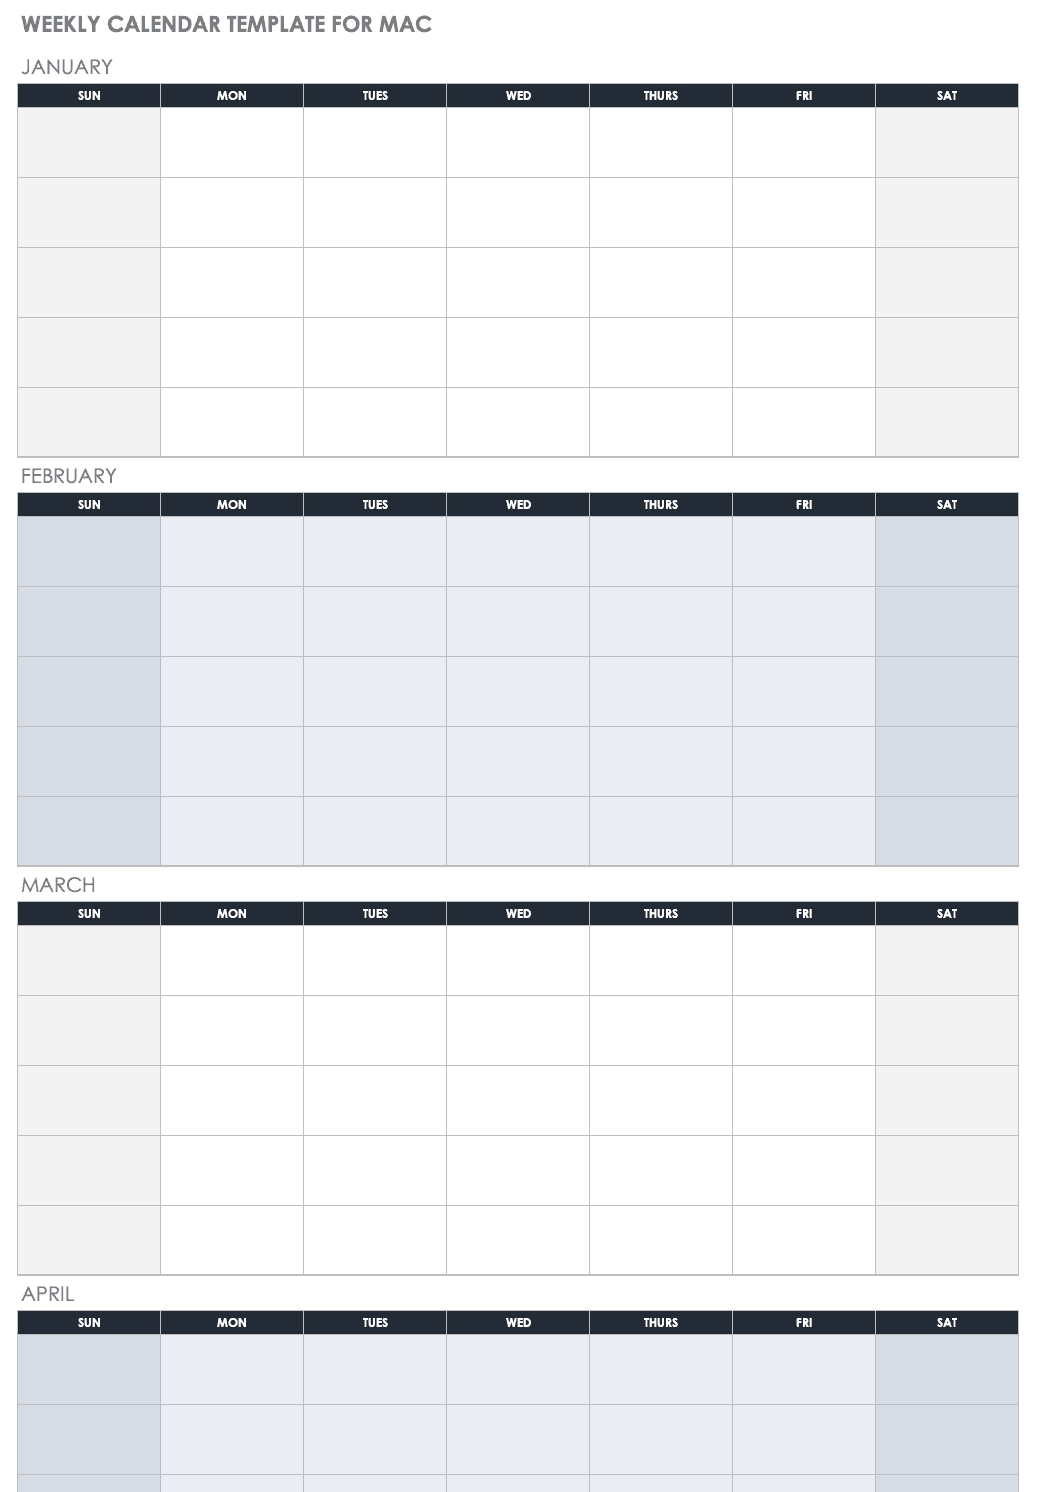 Free Excel Templates For Mac - Pm, Accounting &amp; More Calendar Template On Mac